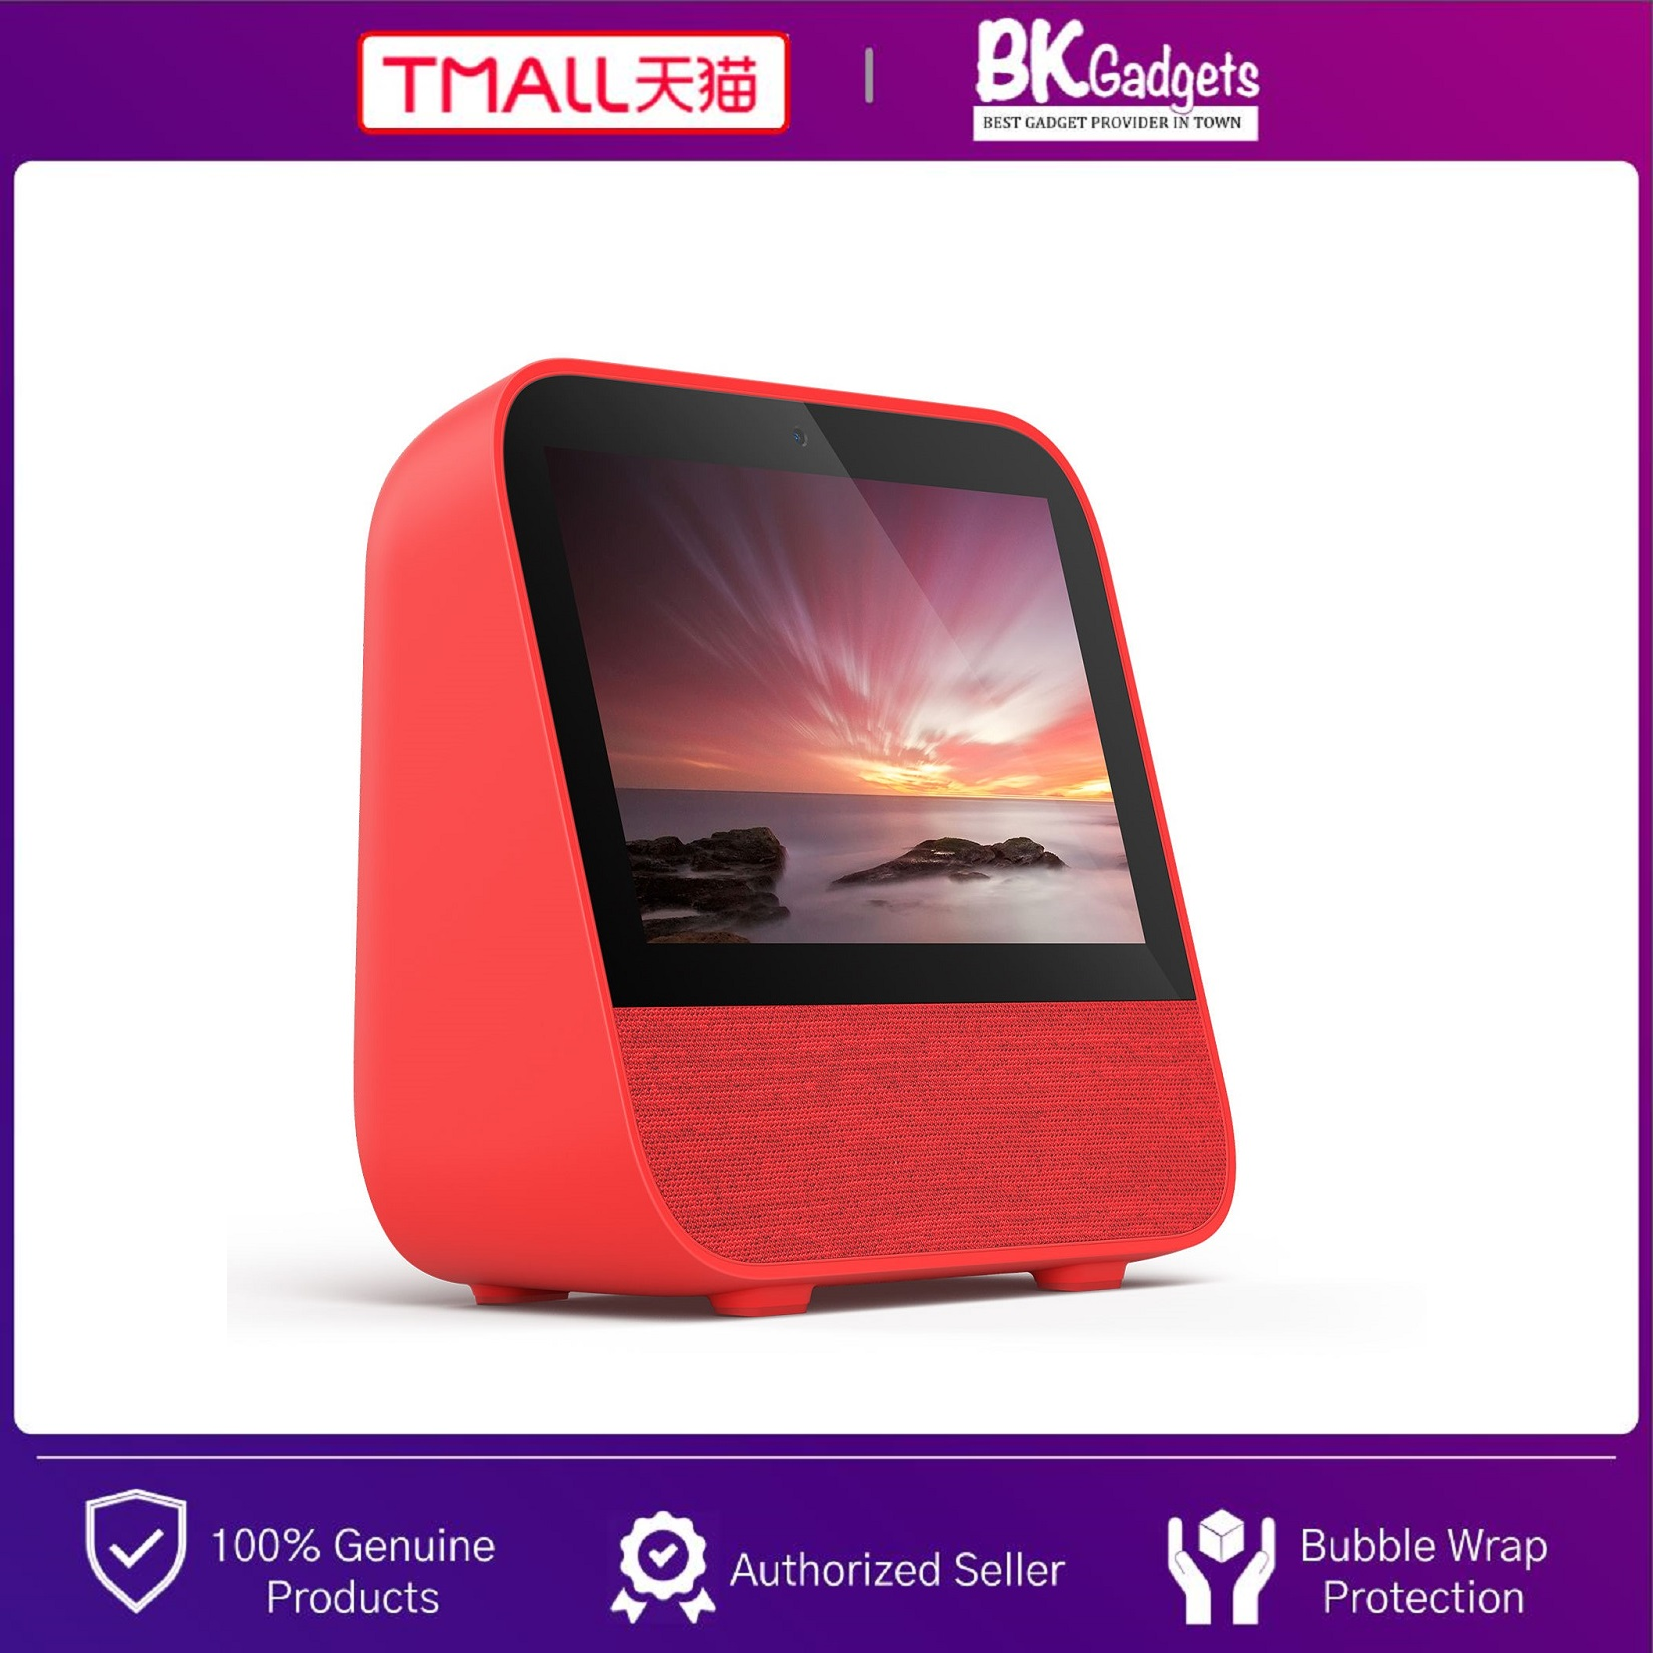 TMALL Genie CC Build in Tmall Genie Smart Assistant - Smart AI Speaker with 7 Inch LCD Display Touch Screen | Camera